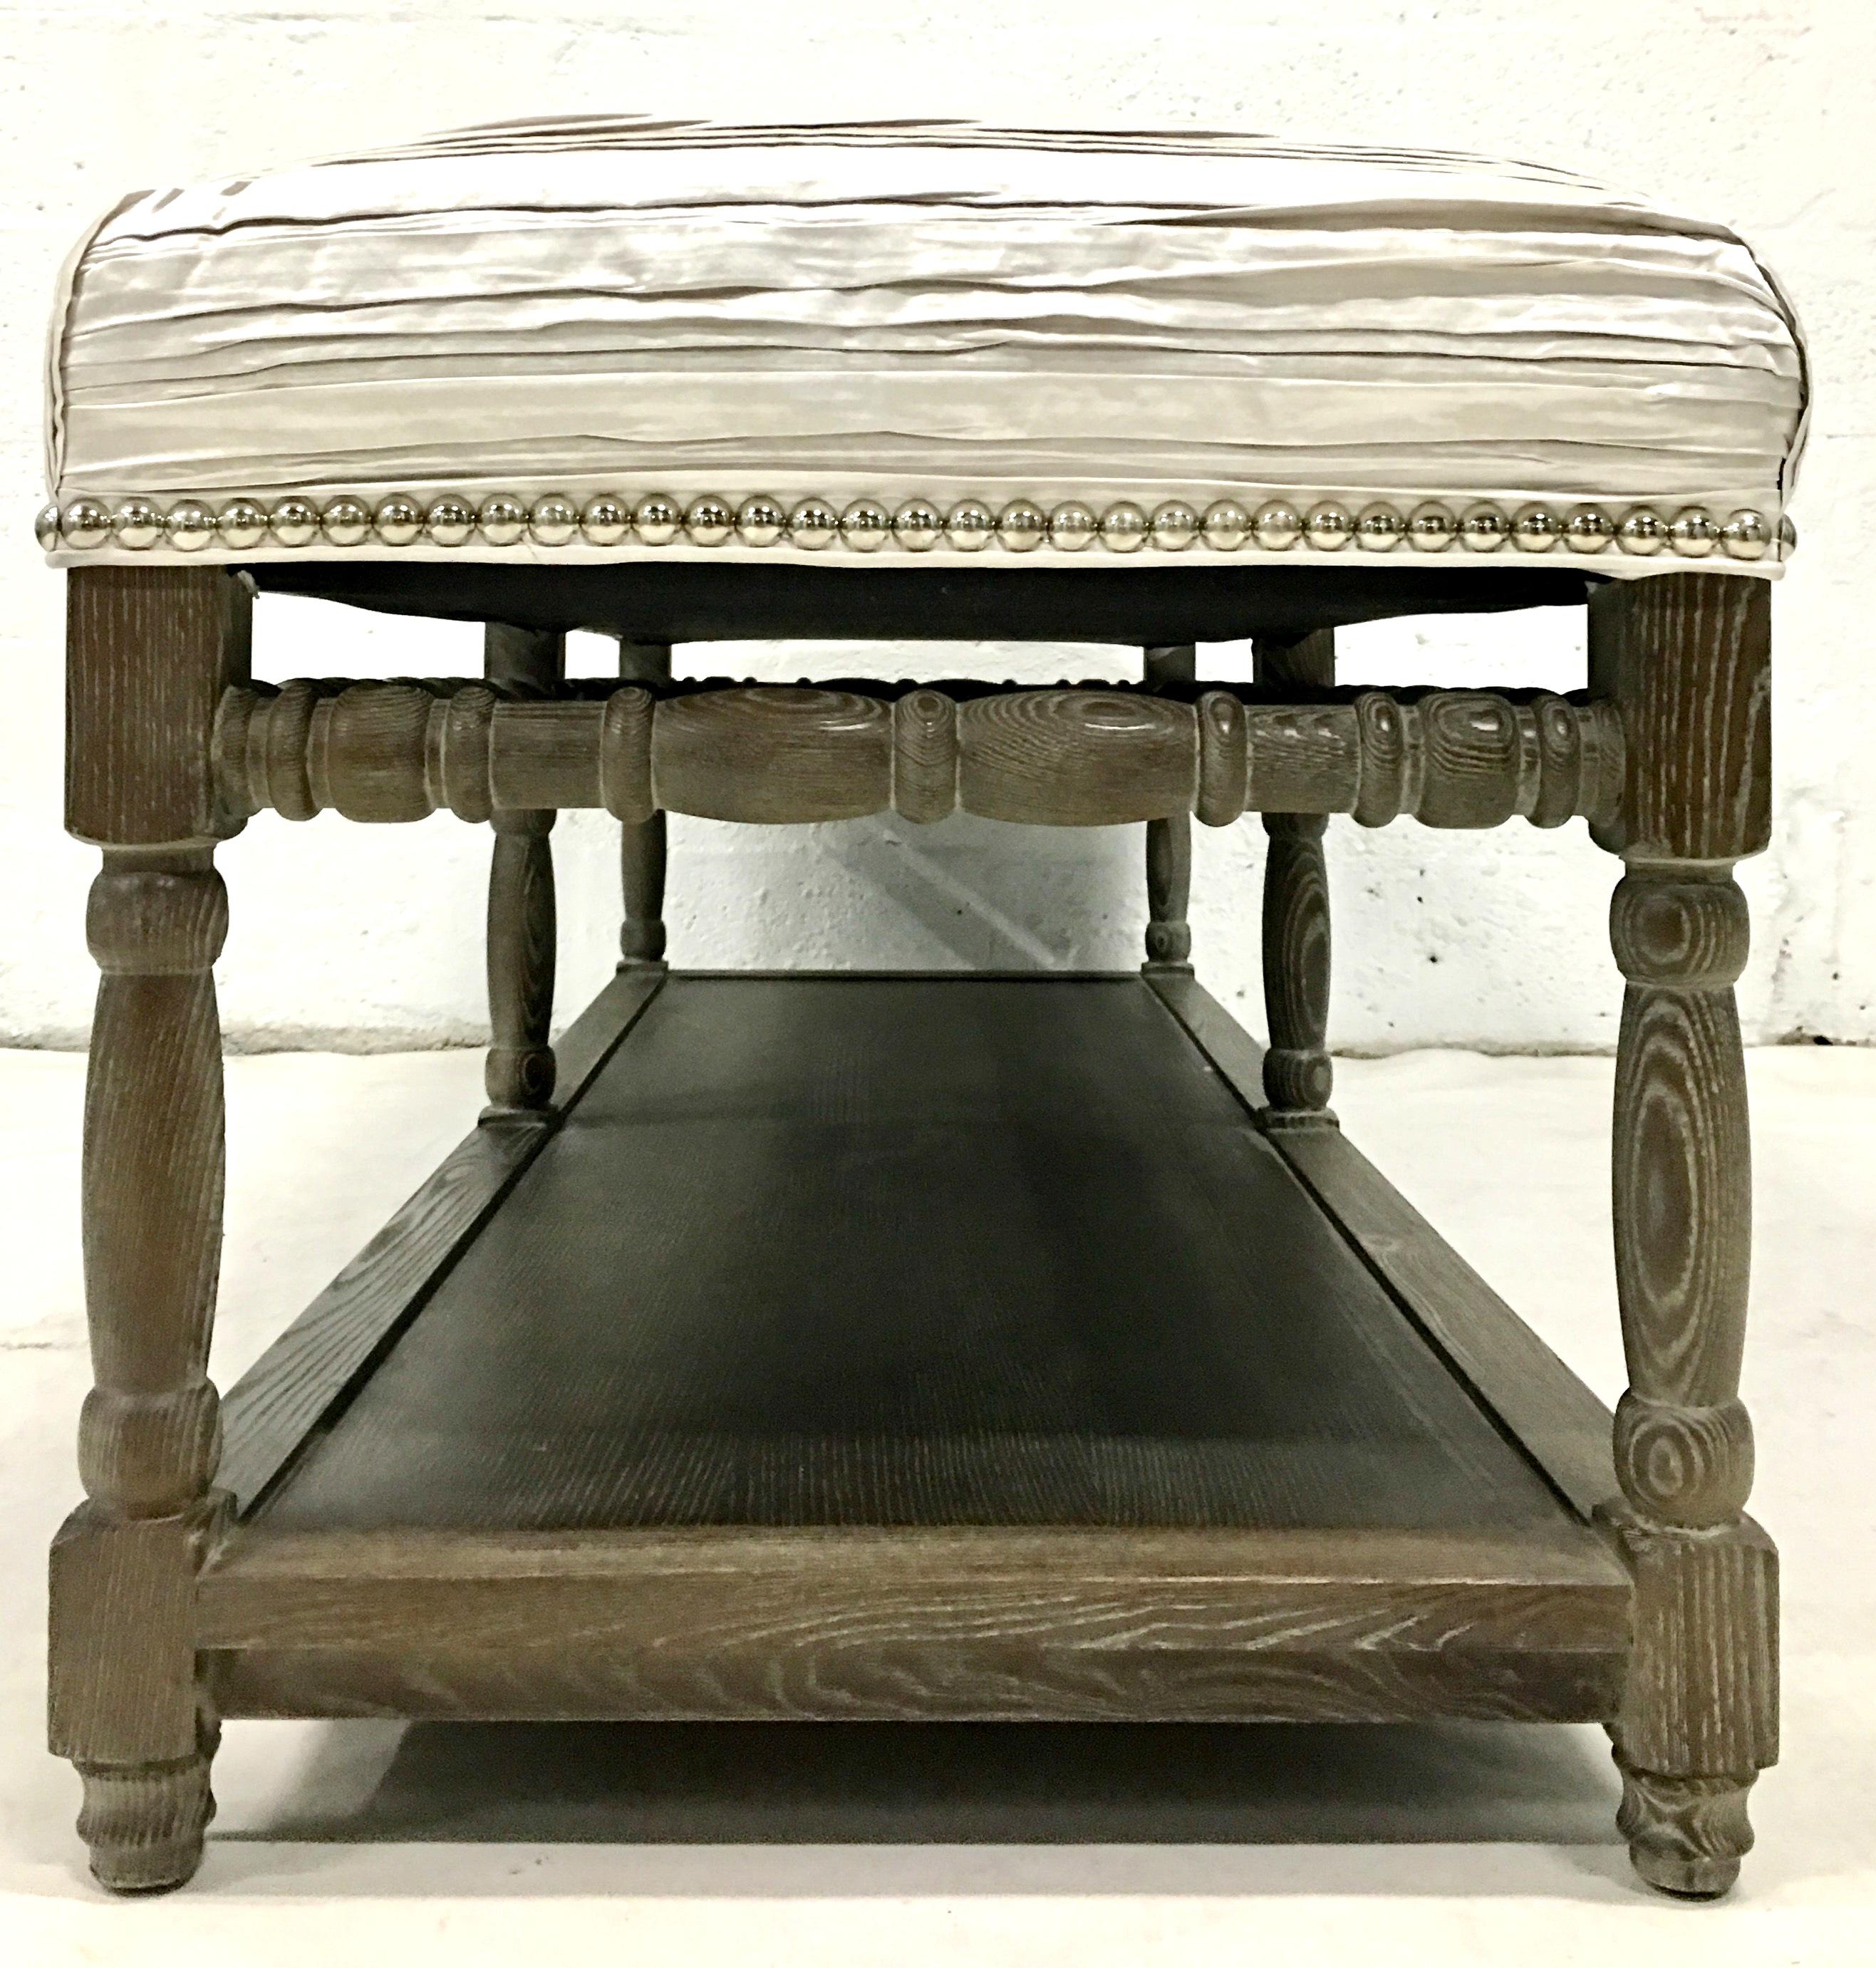 21st Century Contemporary Drift Wood & Silver Metallic Upholstered Wood Bench In Excellent Condition For Sale In West Palm Beach, FL